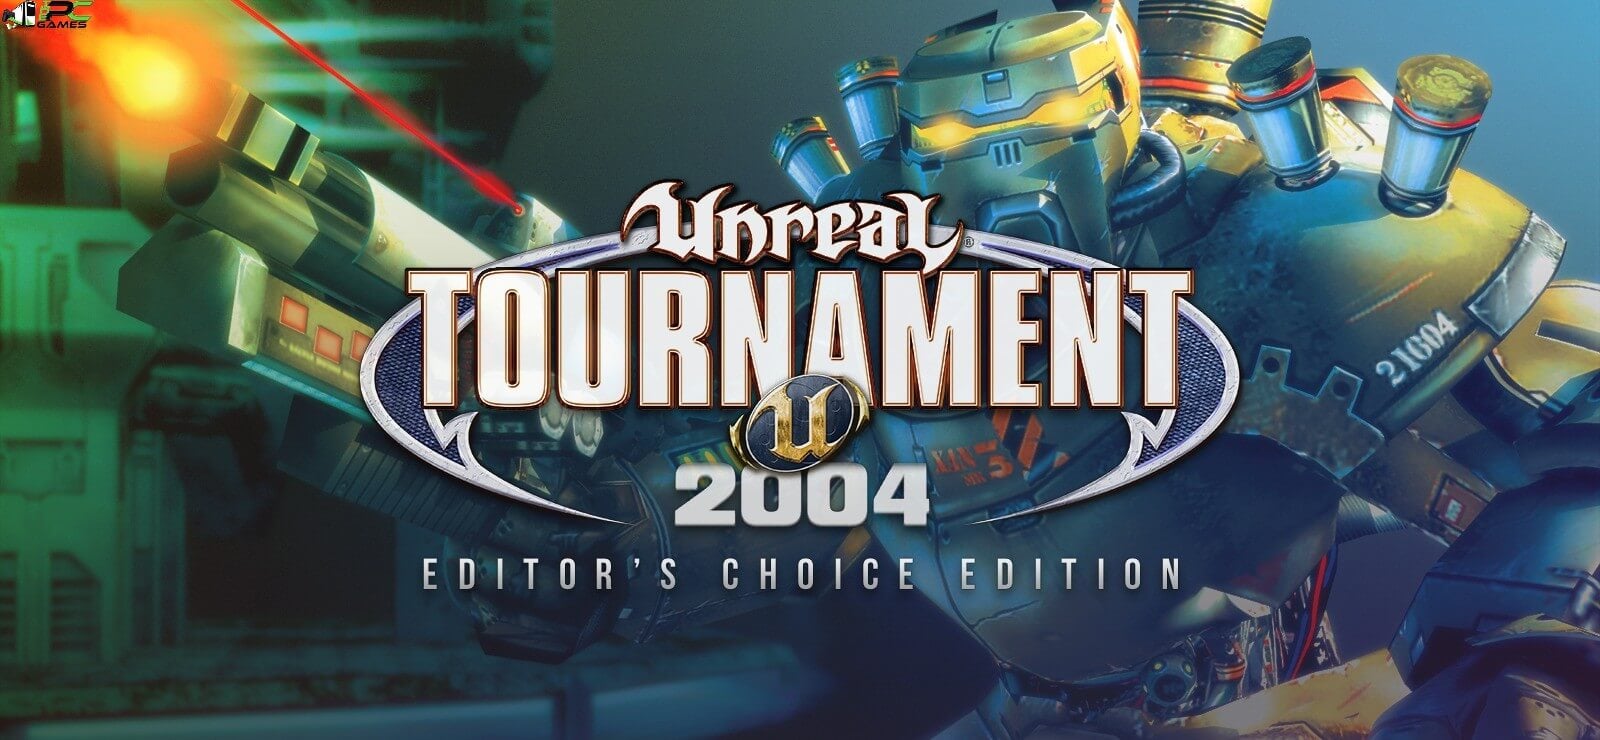 Unreal Tournament 2004 Editor’s Choice Edition Free Download